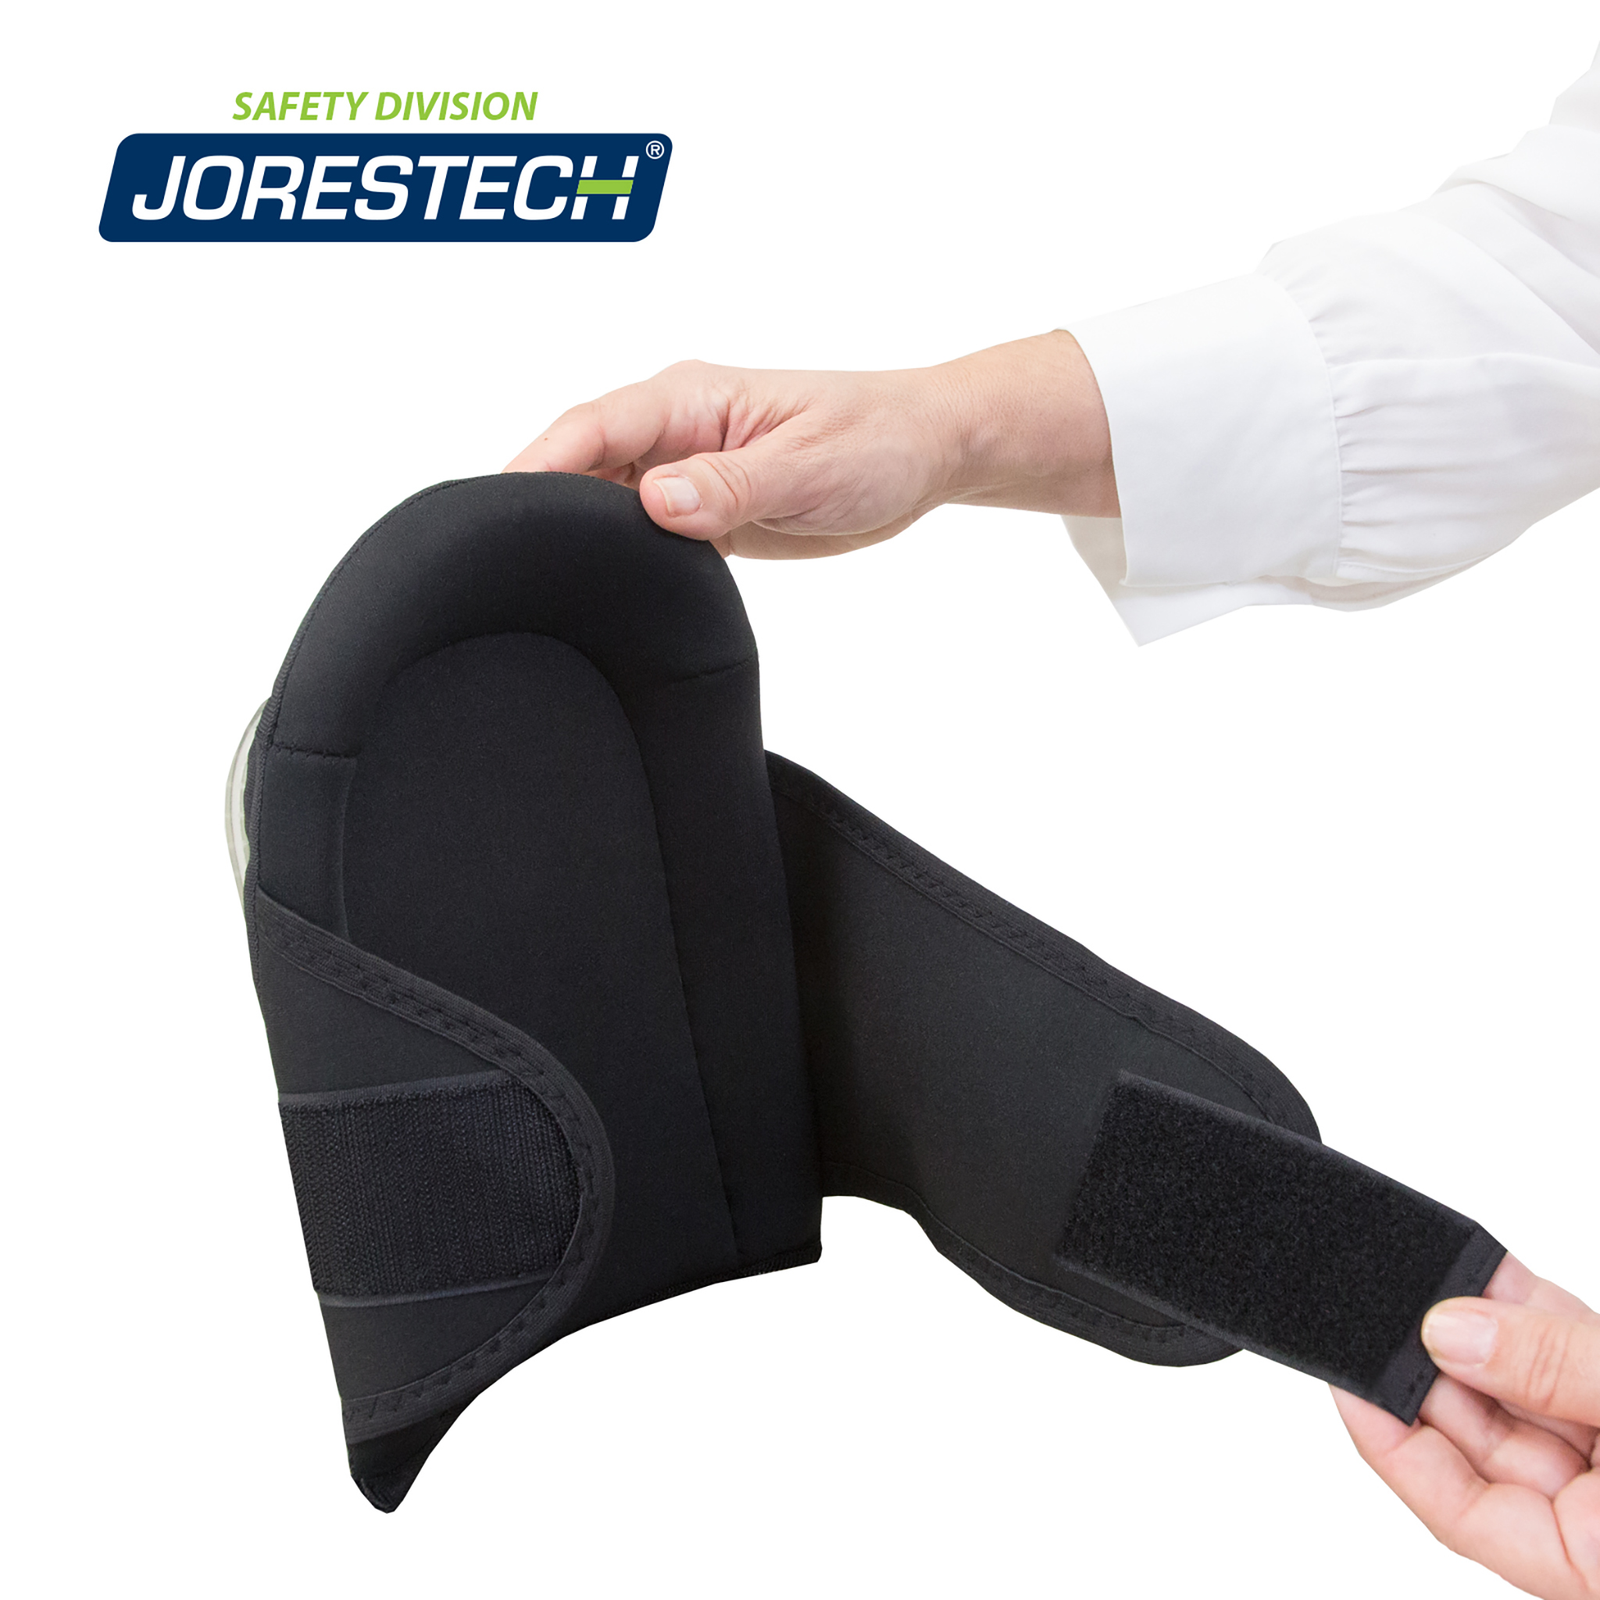 Two hands of a person pulling open the strap of the heavy duty JORESTECH knee pad